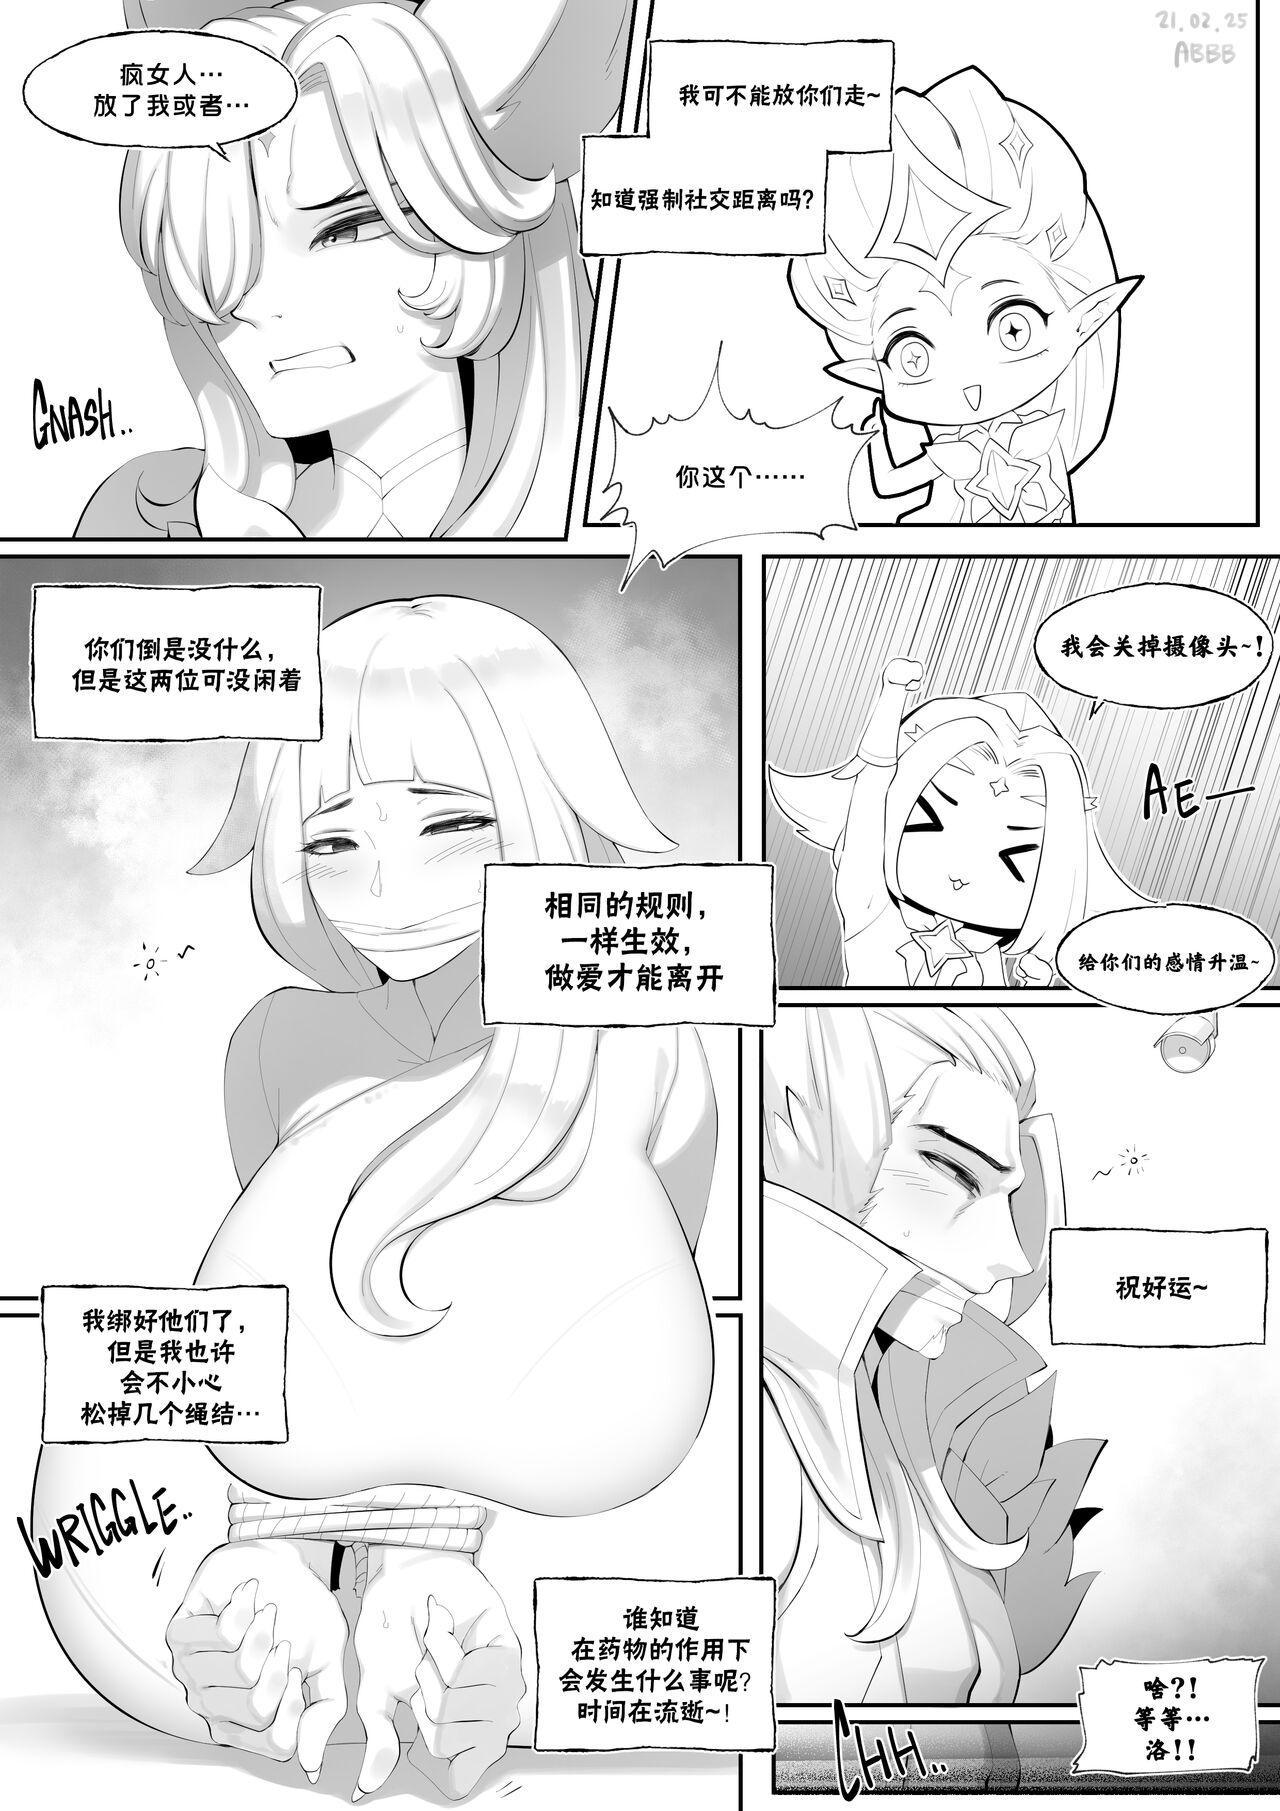 Money Xayah Star Guardian - League of legends Livesex - Page 2